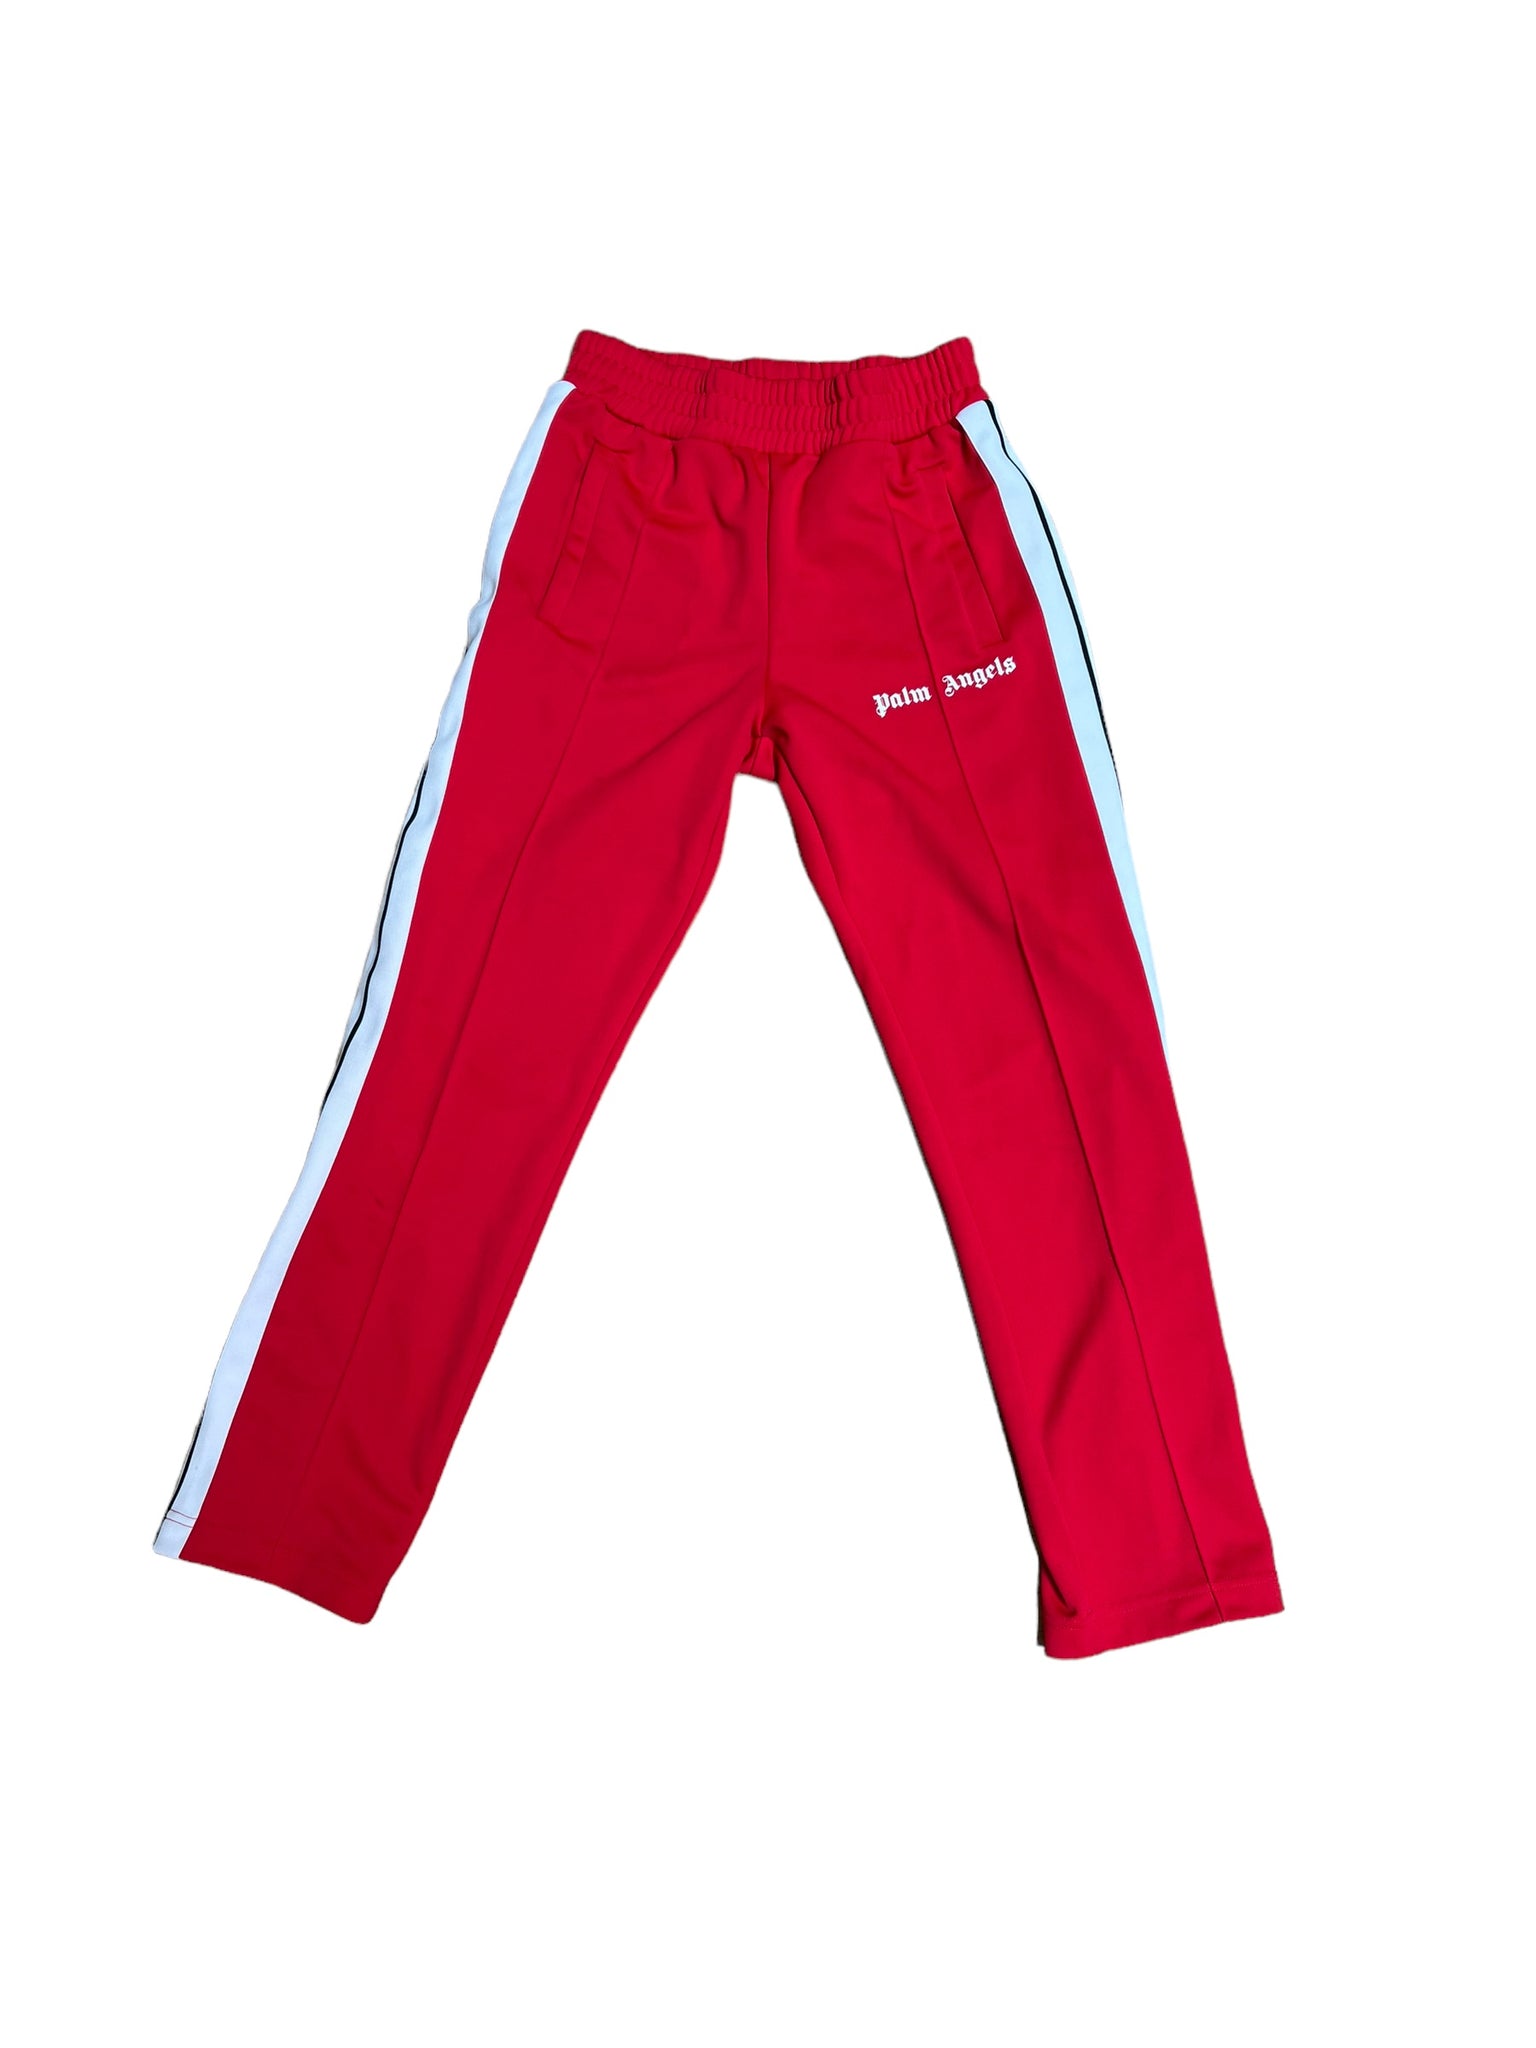 Palm Angels Track Pant "Red" (Pre-Owned)